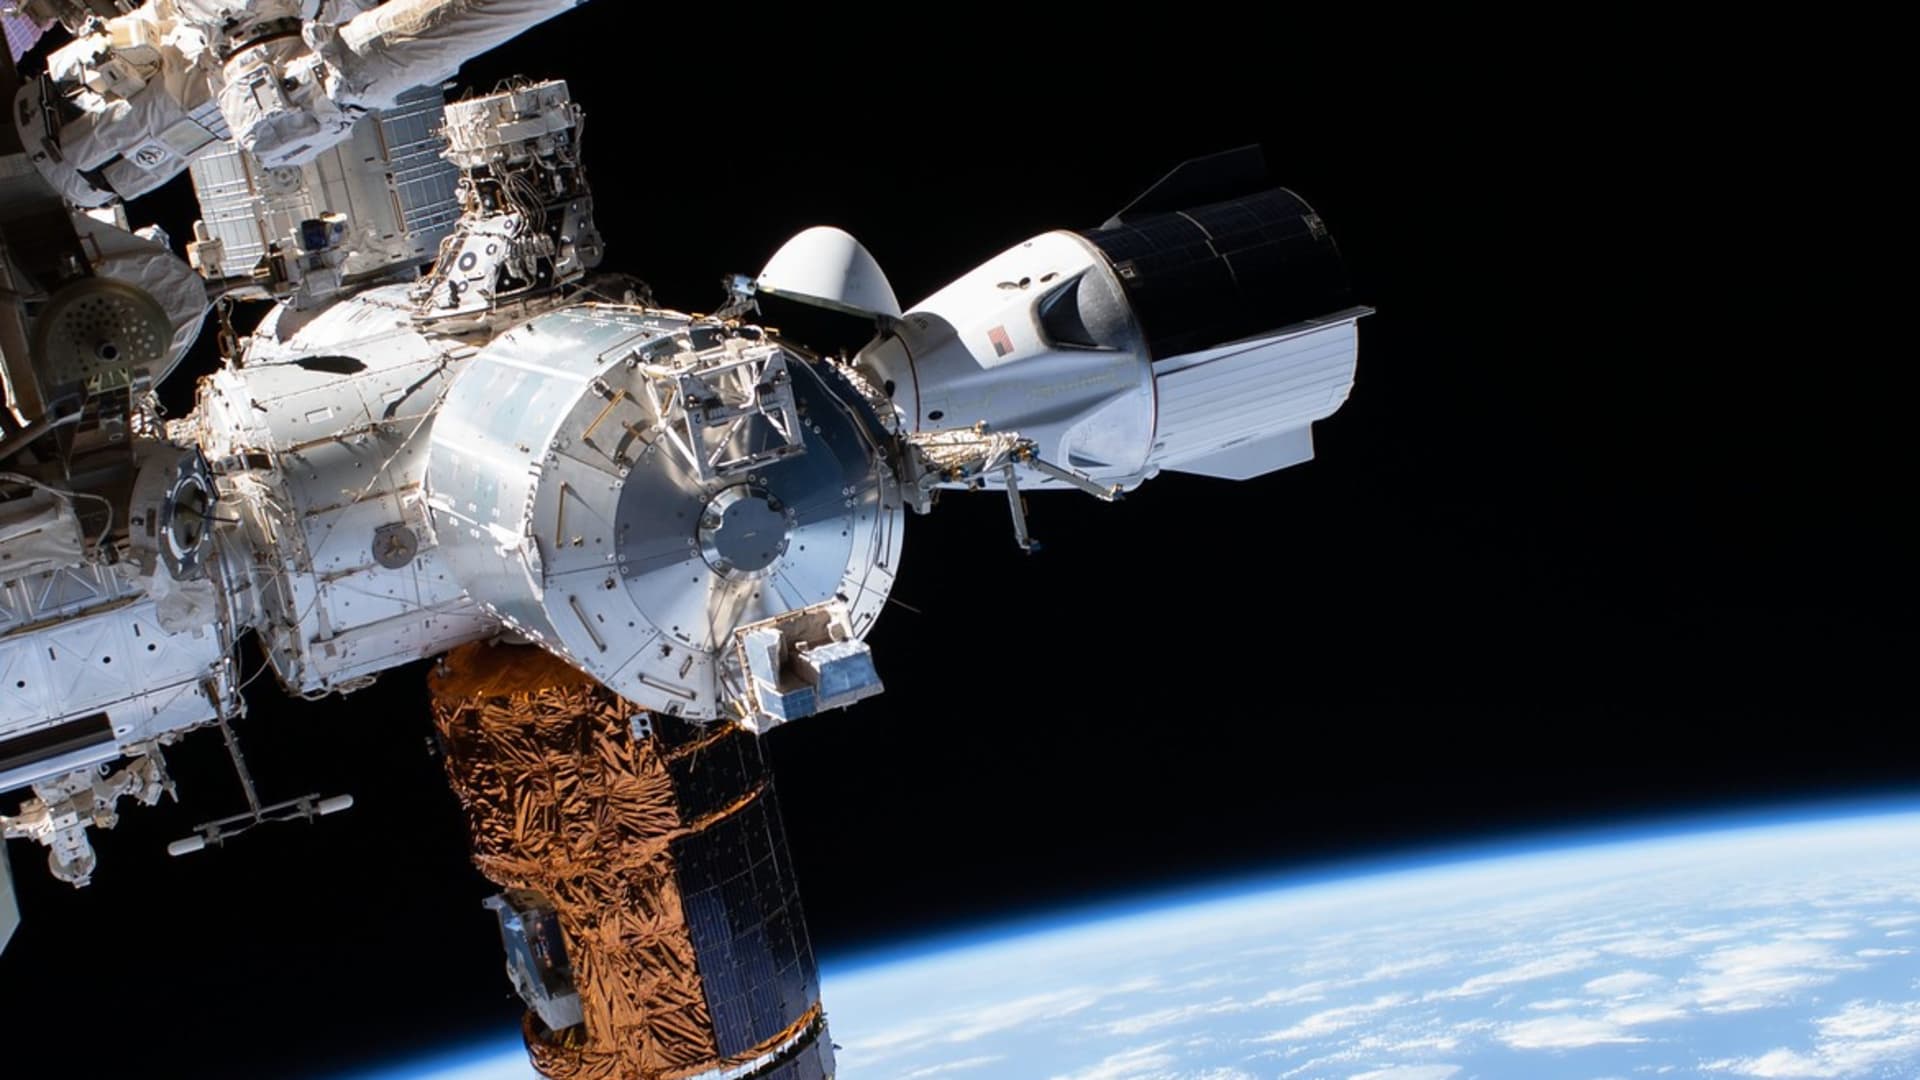 SpaceX's Crew Dragon Endeavour seen docked with the International Space Station on July 1, 2020.